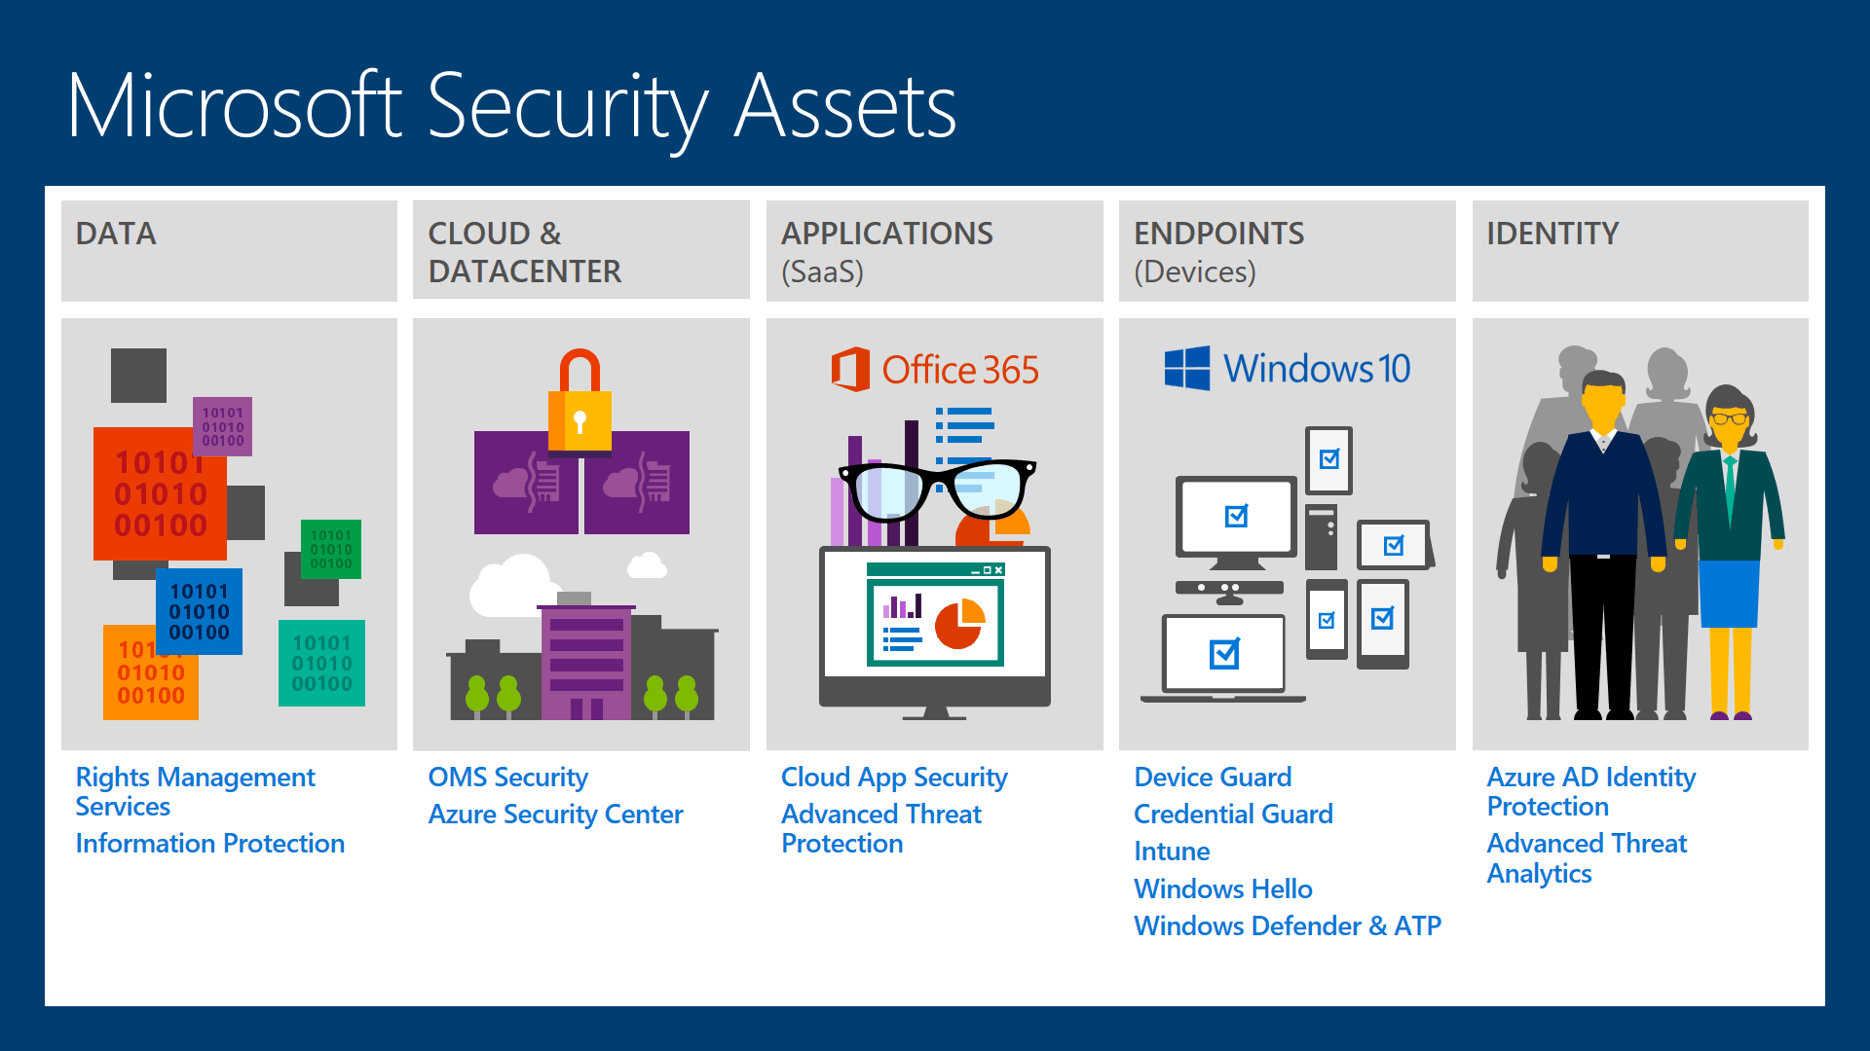 Microsoft Security Assets